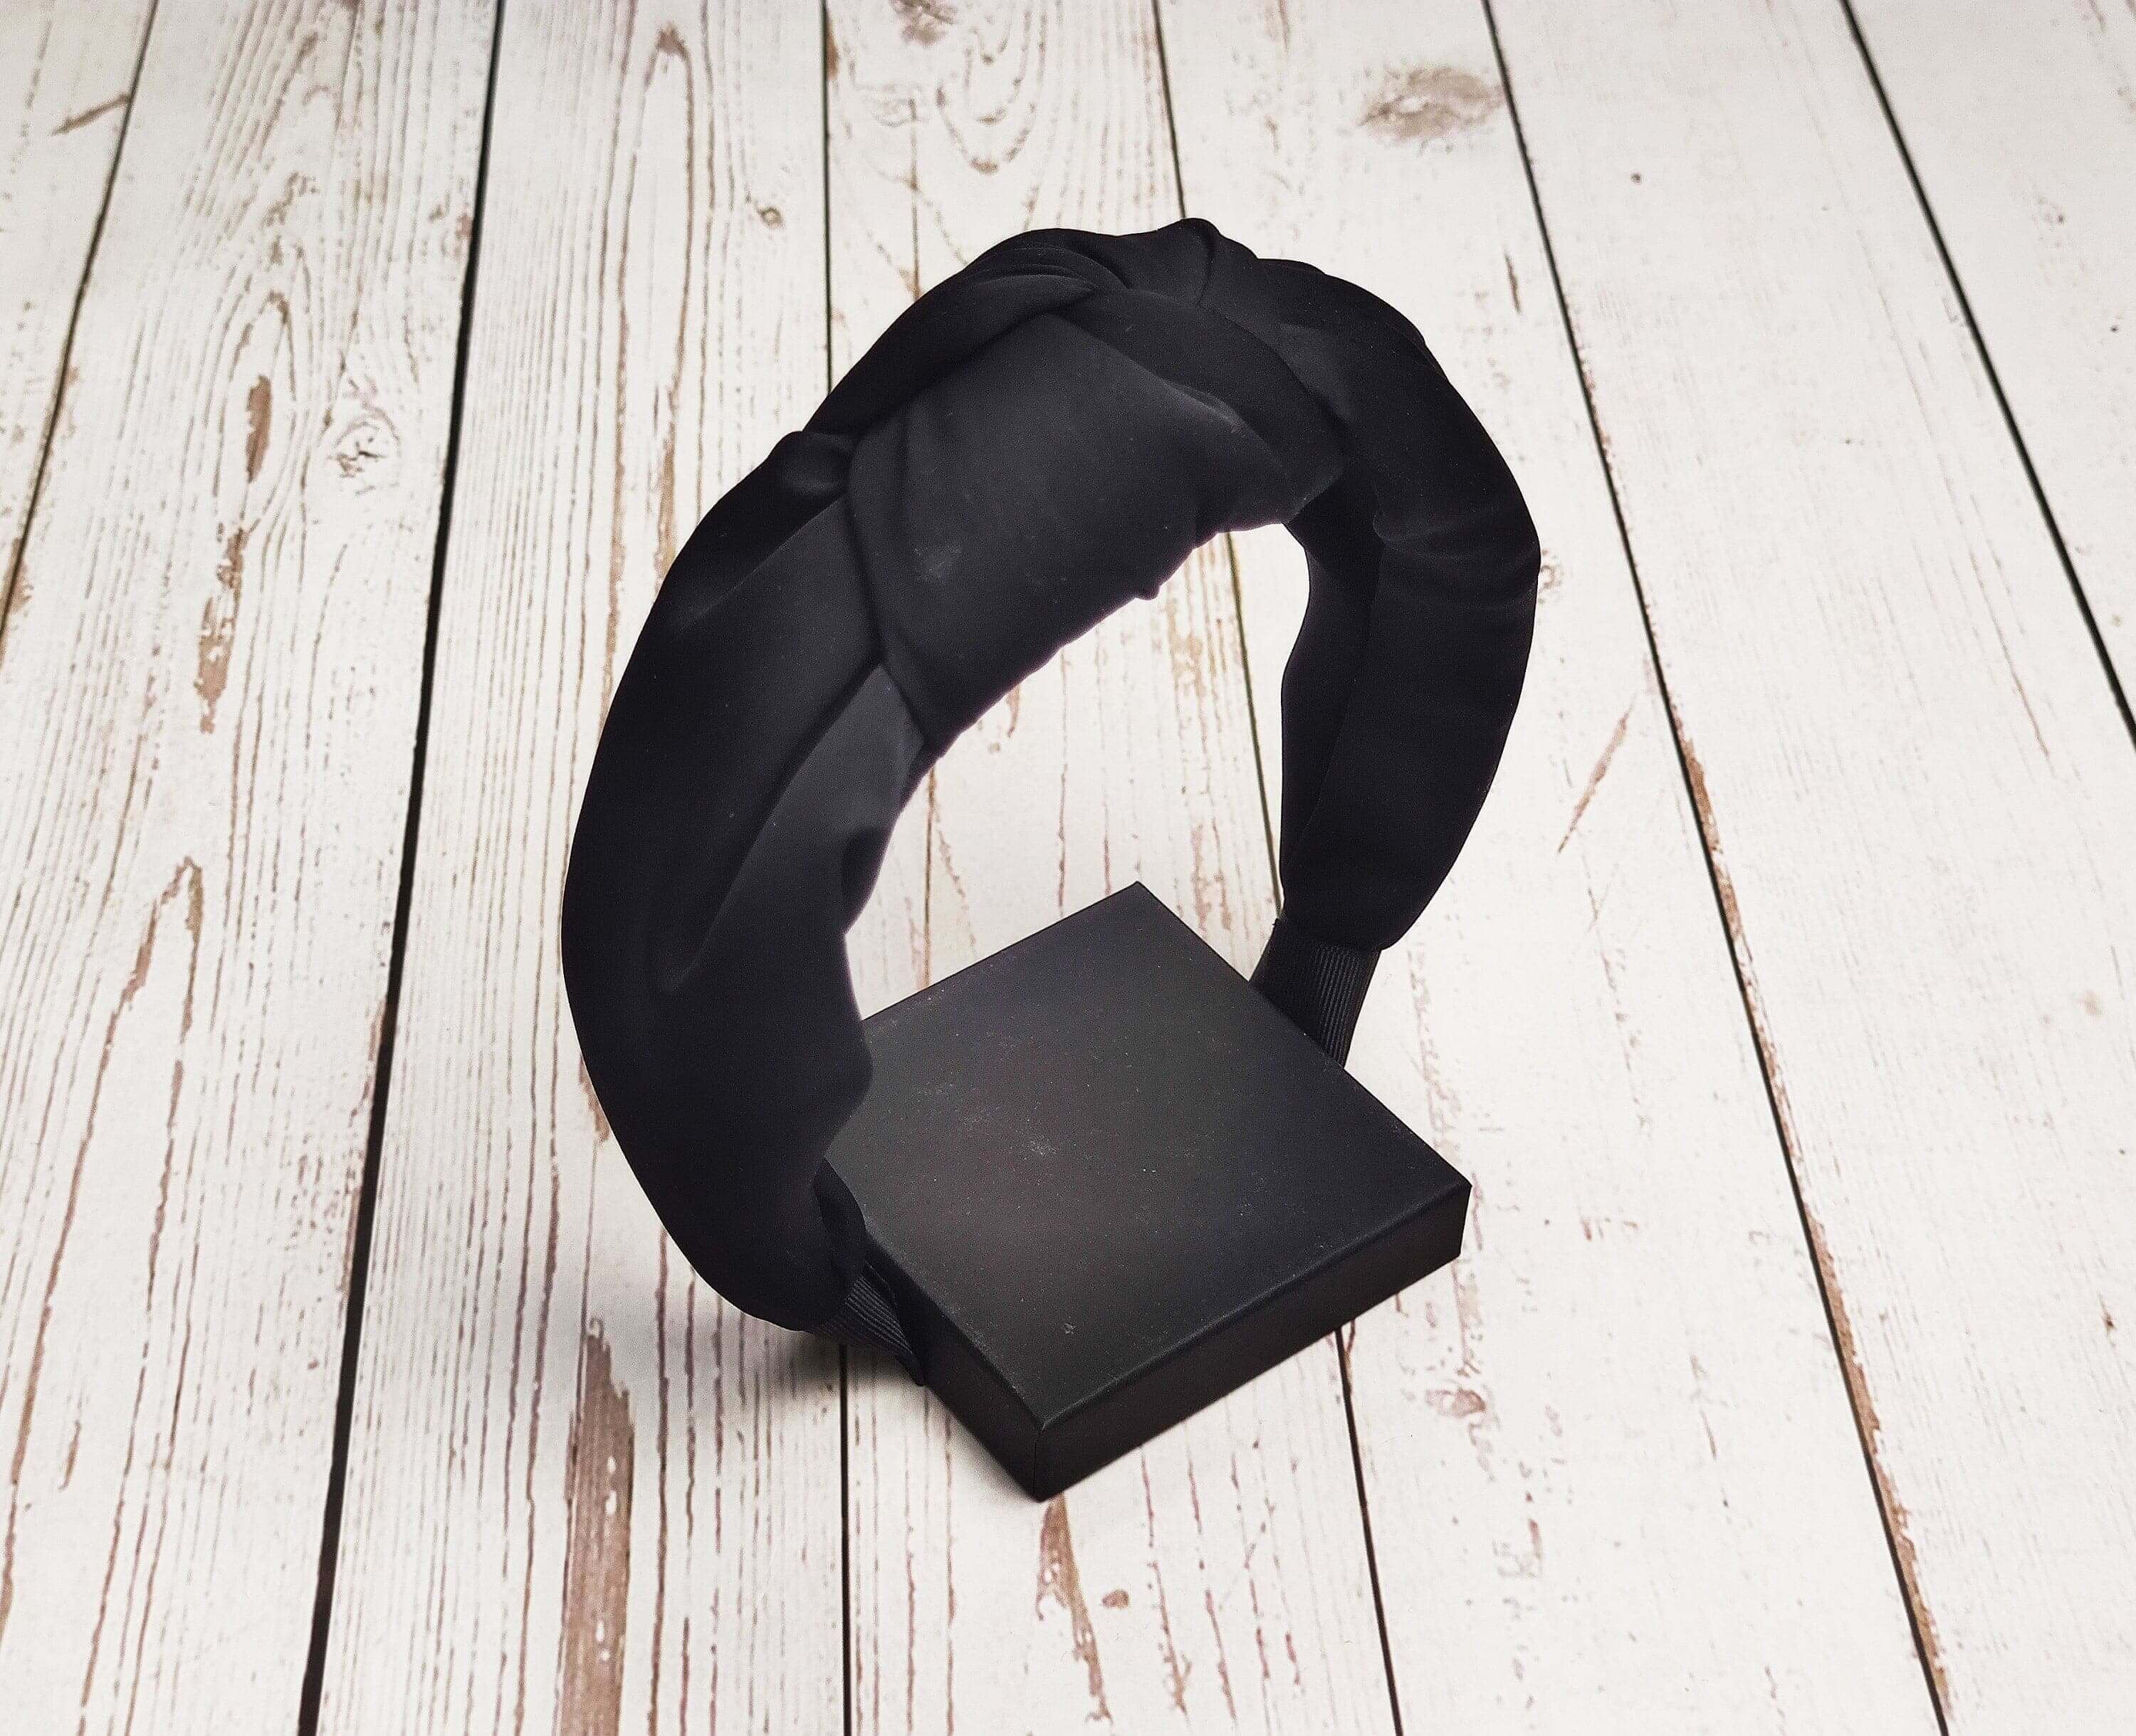 Get that polished look for special events or weddings with a black twist knot headband! Made from soft, luxurious materials, they will keep your hair styled and looking perfect all evening long.